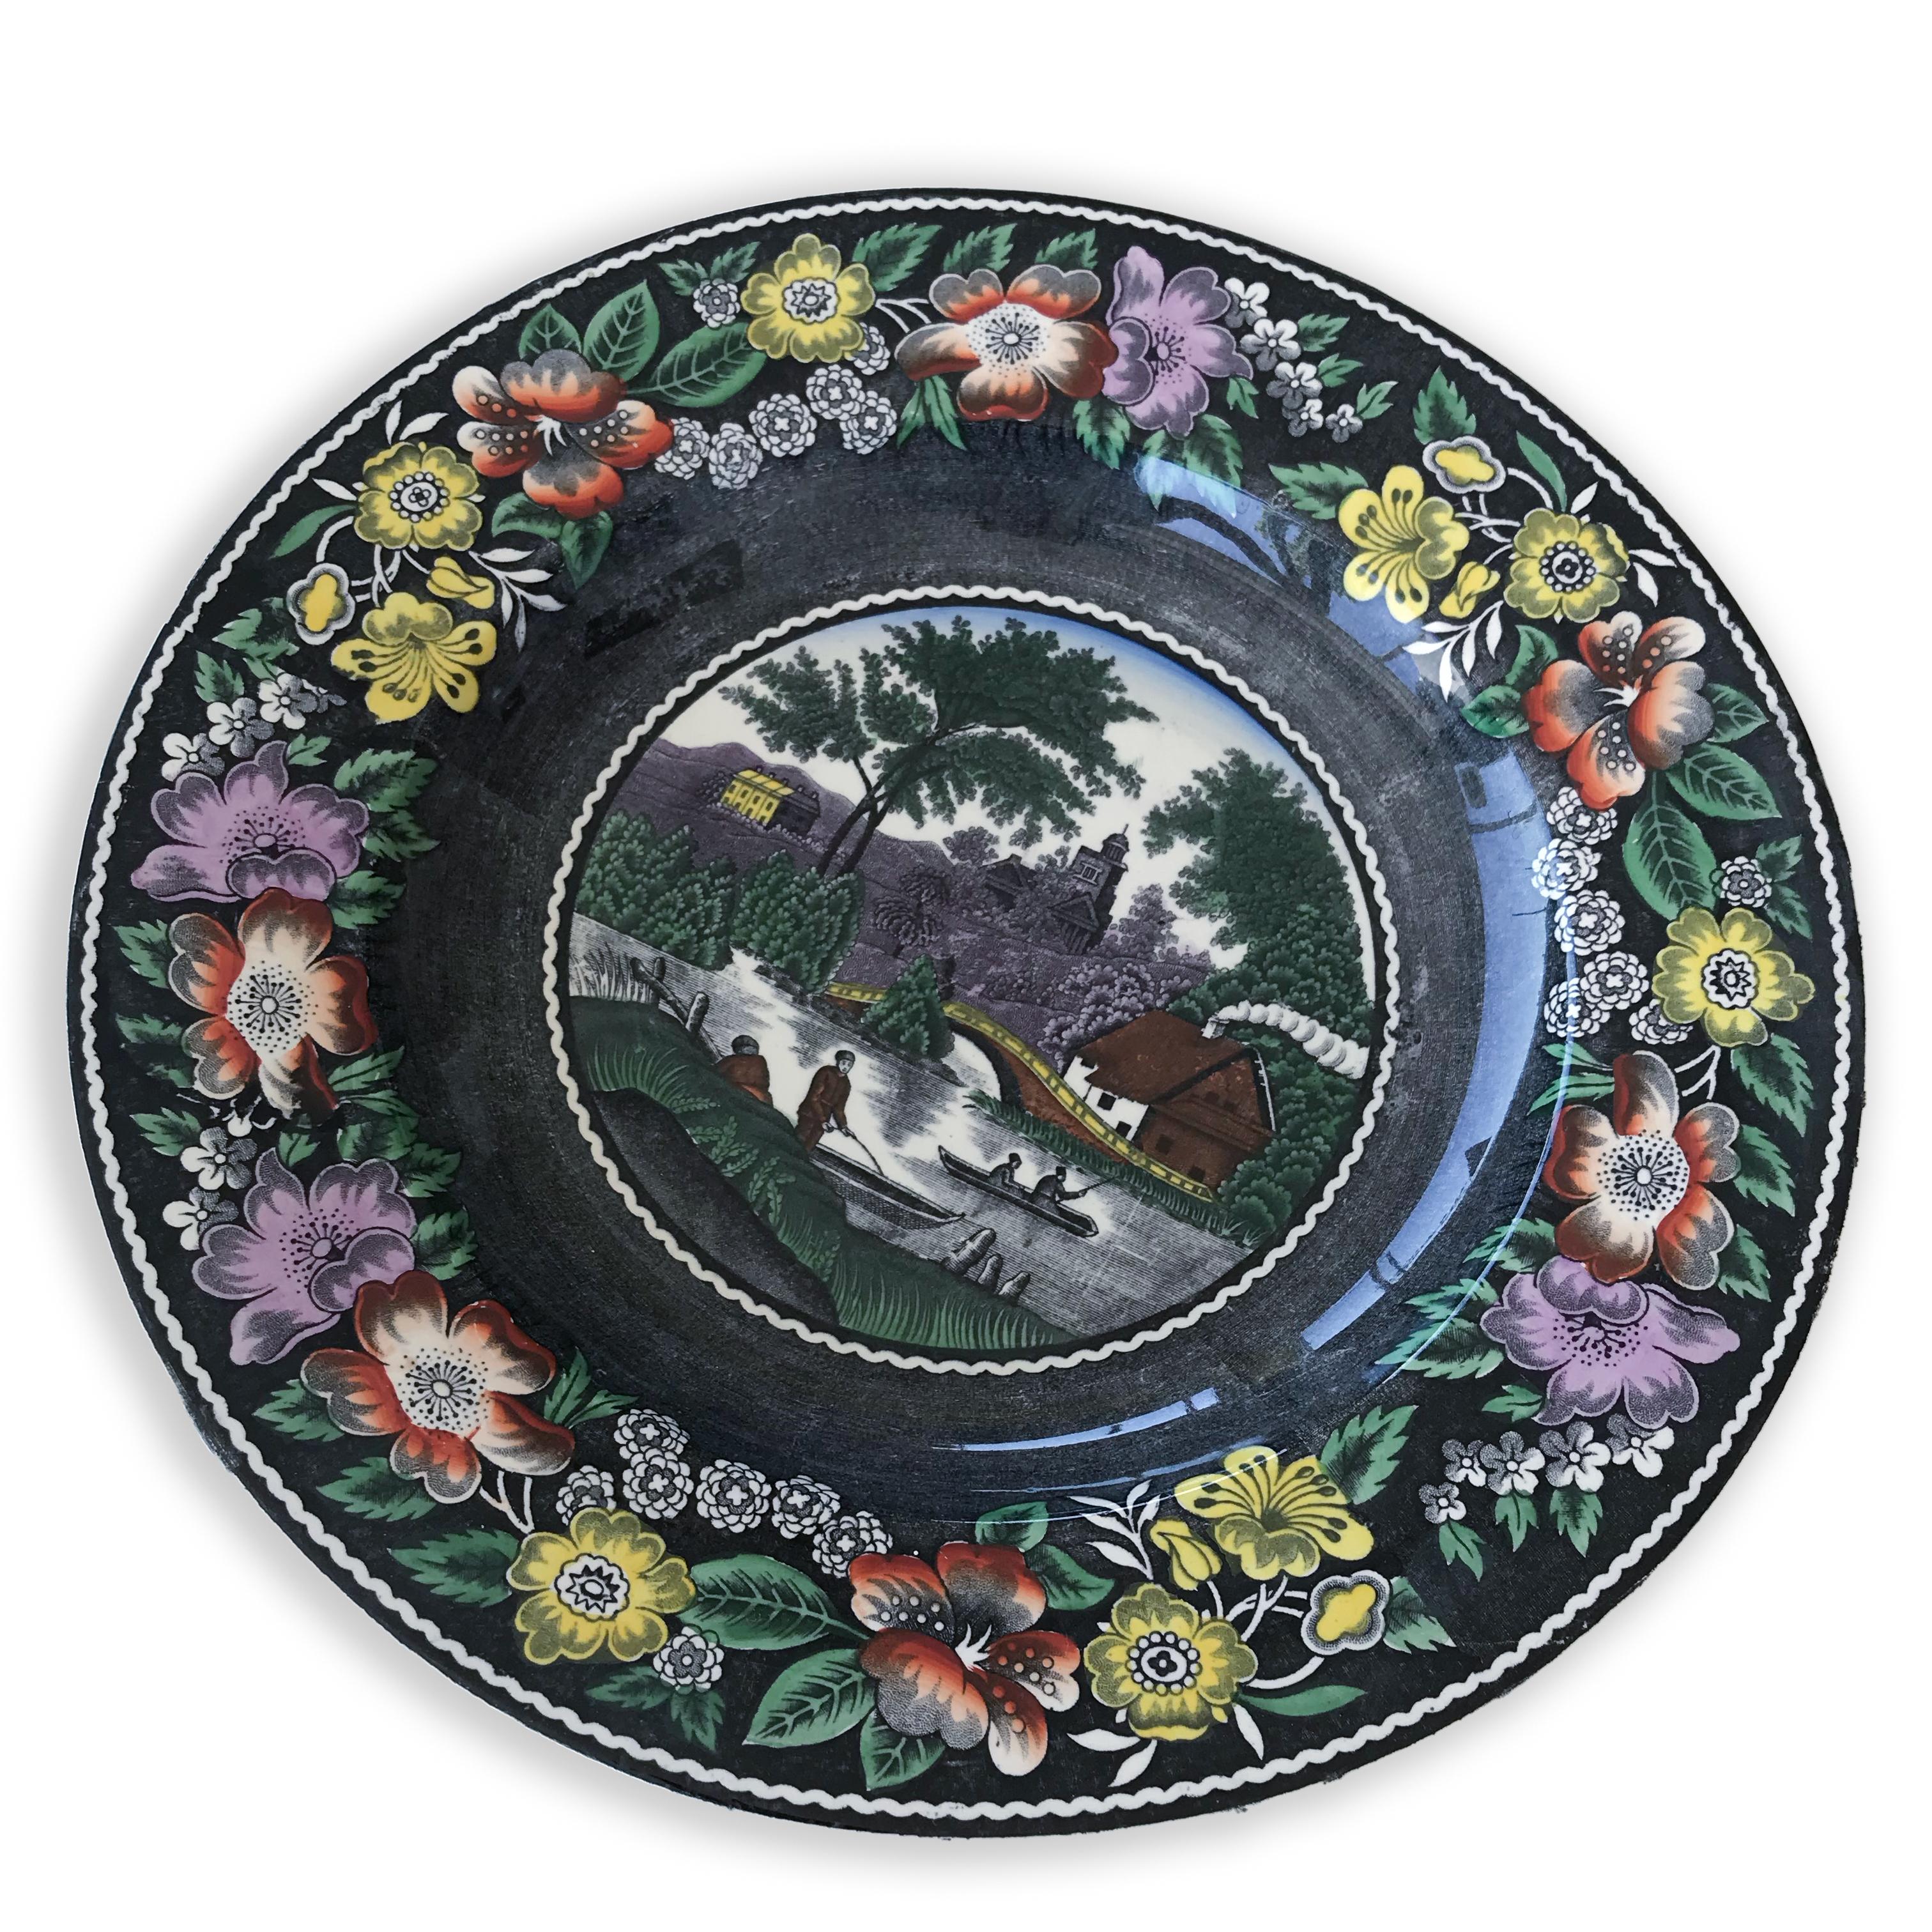 Stunning wall plate by Société Ceramique Maestricht. Made in Holland.
The plate has a beautiful black & white decor called Wilde Rose with hand painted accents in pink, yellow, green. 
The Wilde Rose decor was produced between 1856 and 1909. 
The